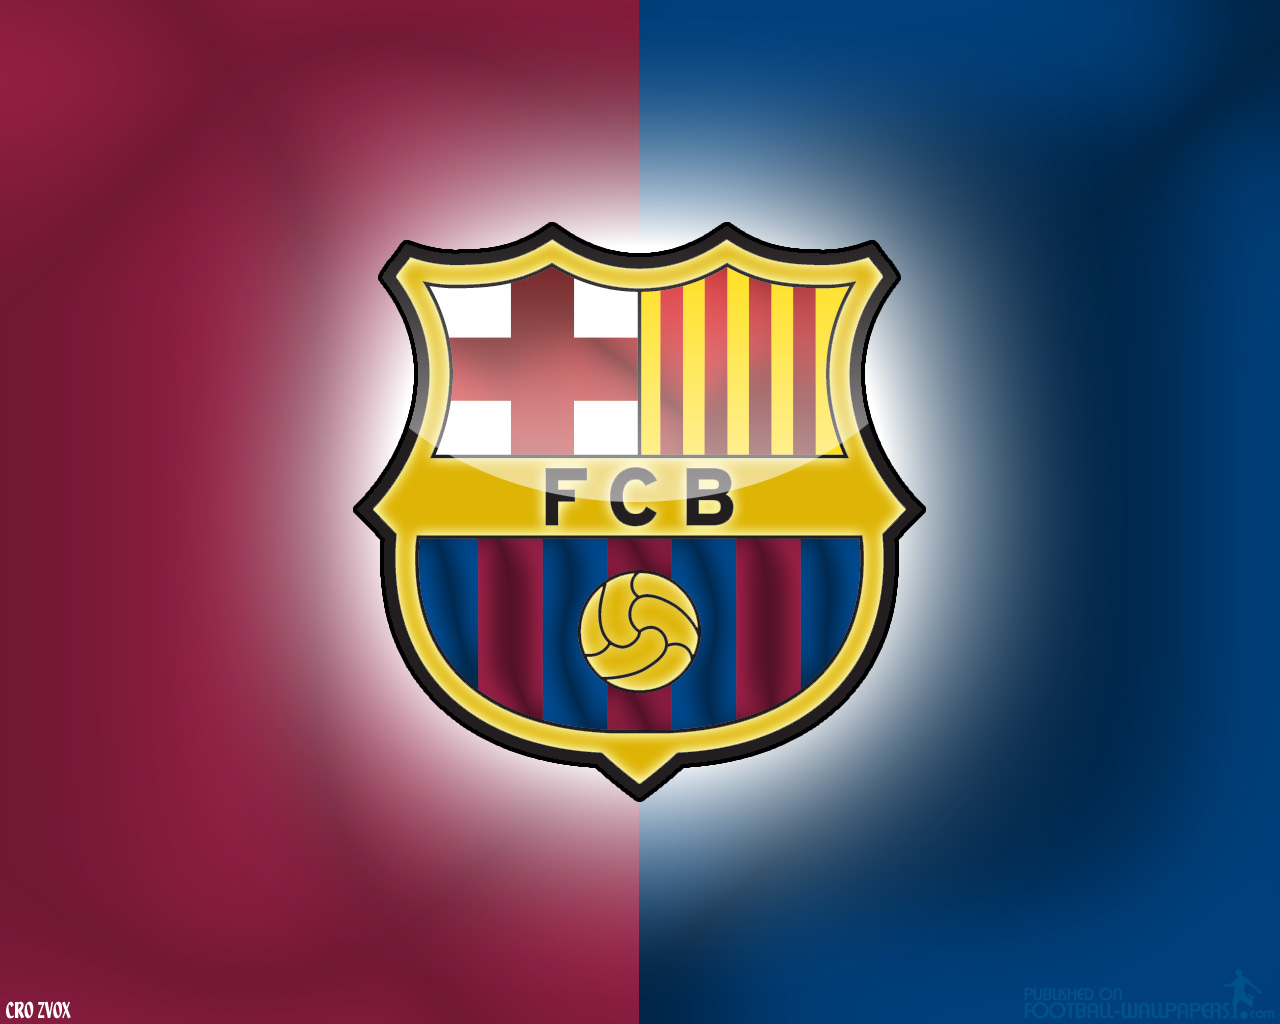 Download this Barcelona picture